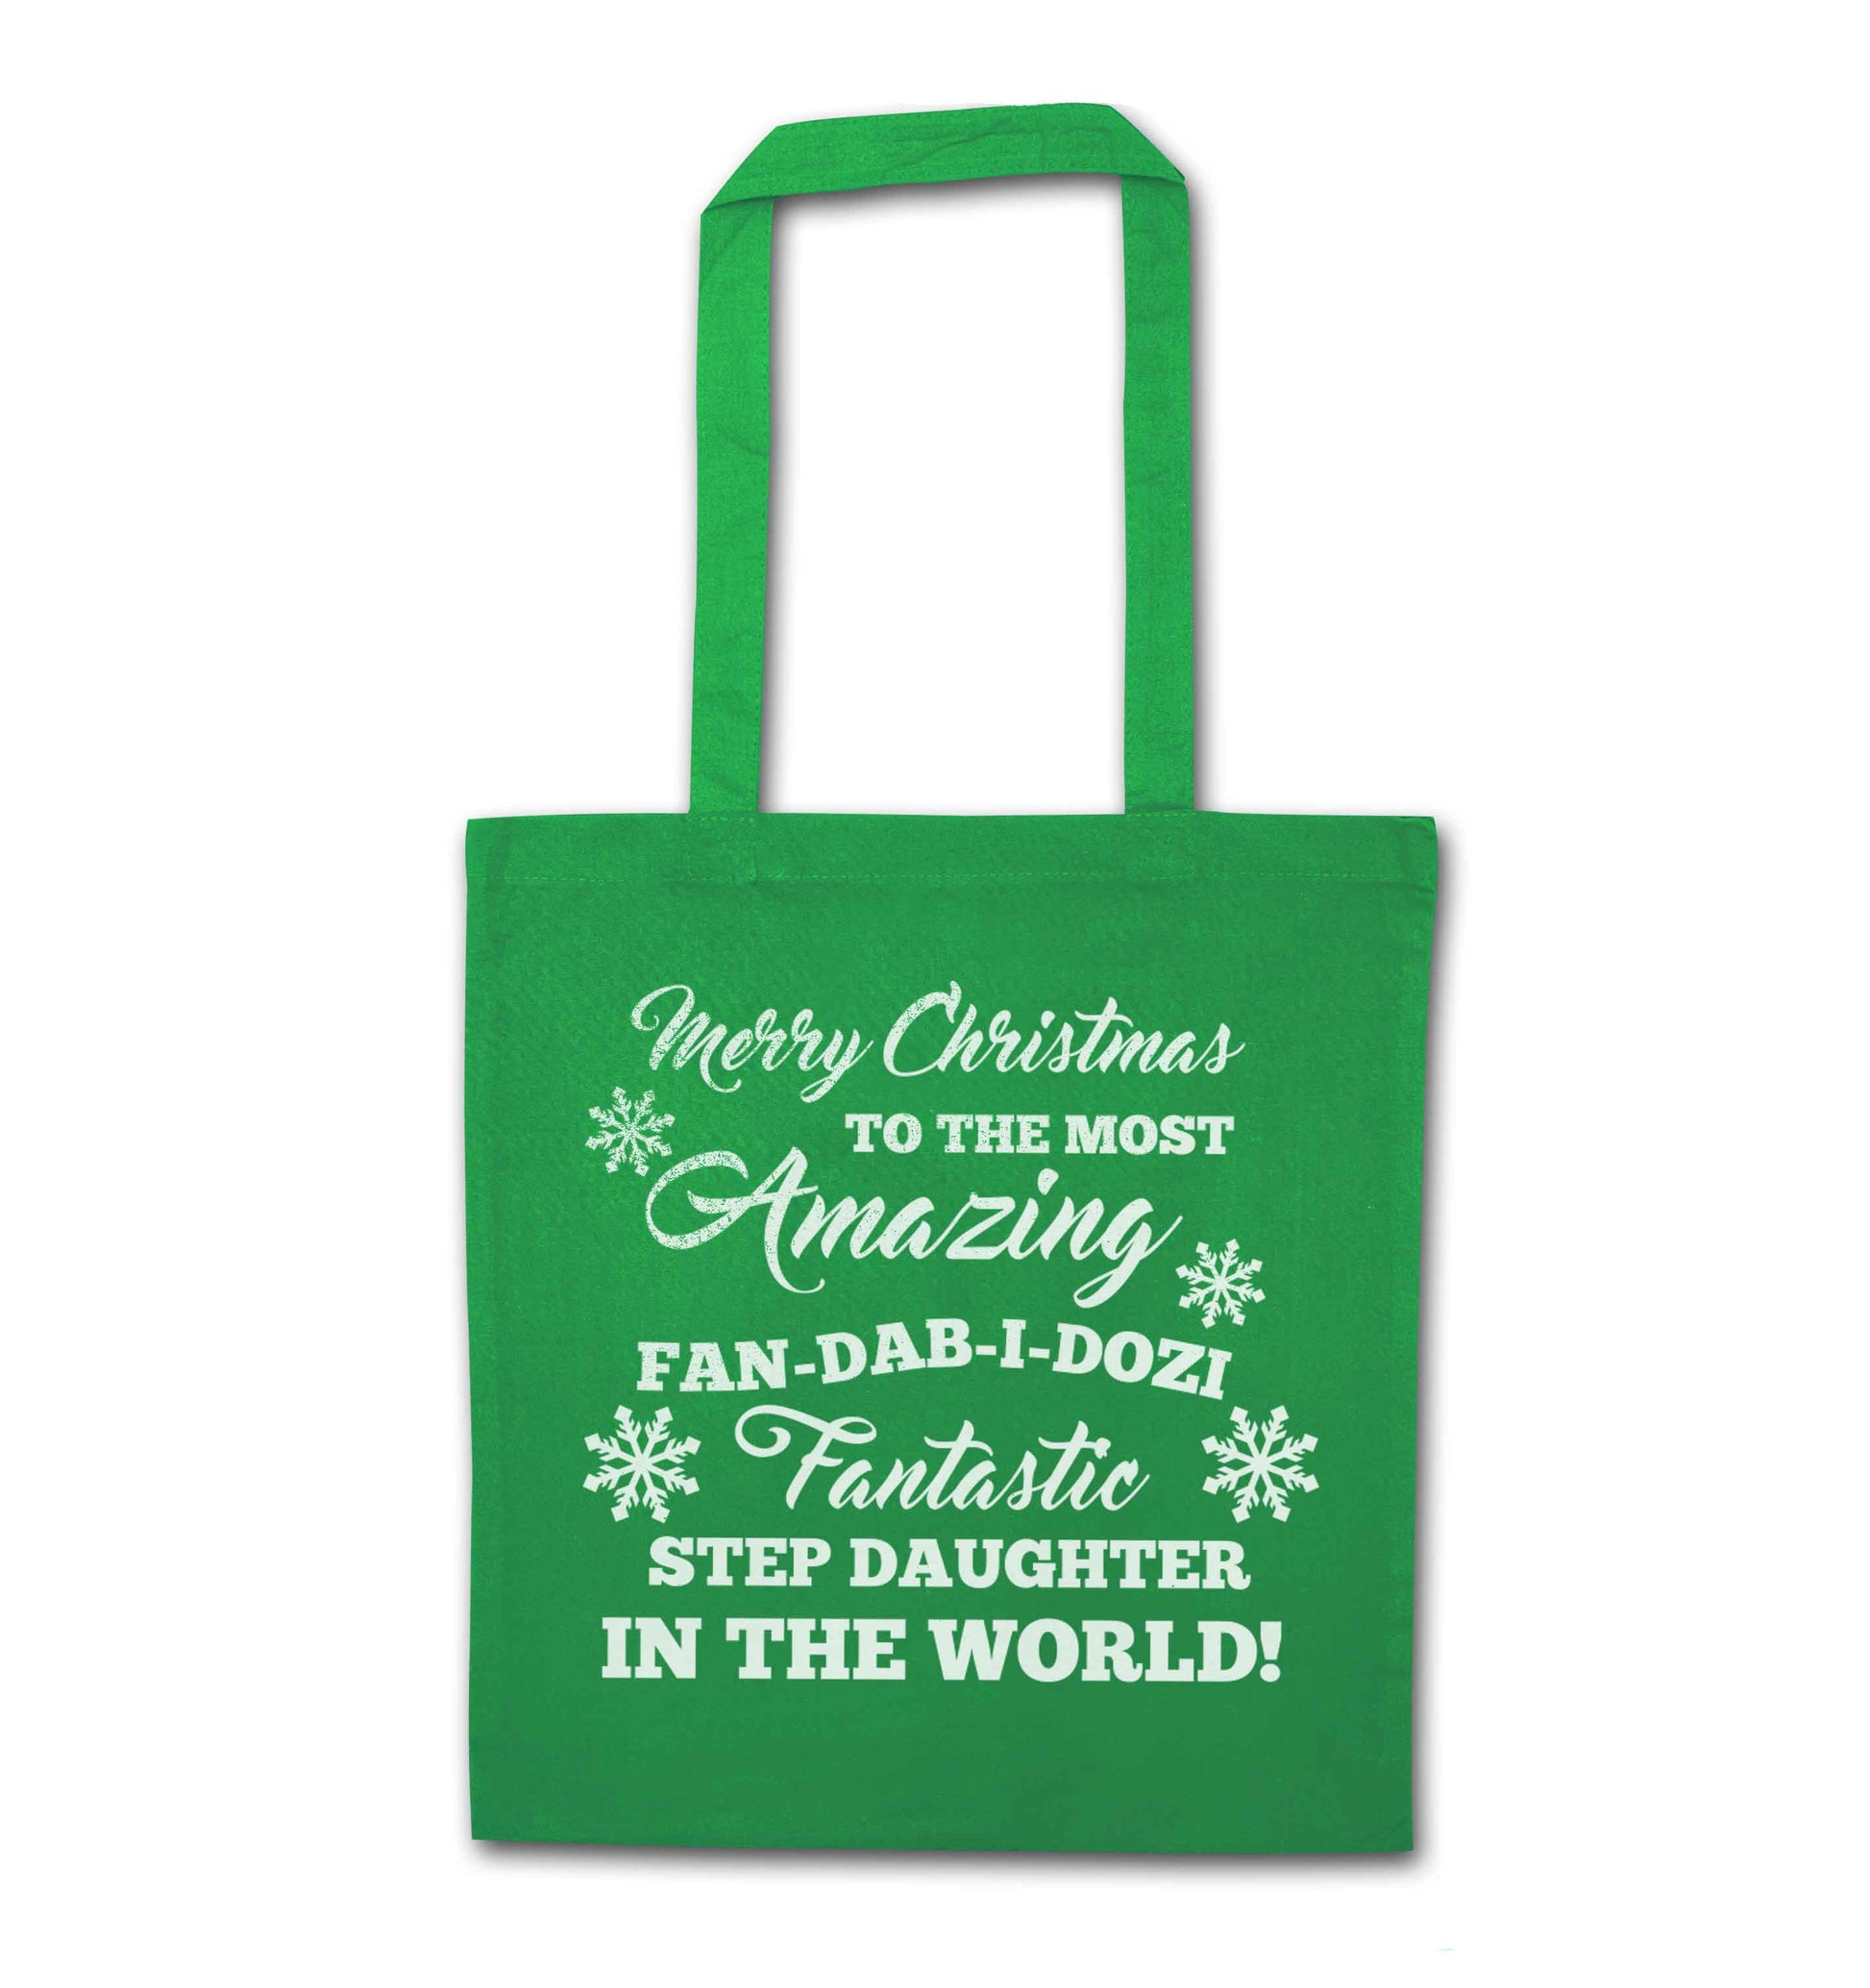 Merry Christmas to the most amazing fan-dab-i-dozi fantasic Step Daughter in the world green tote bag